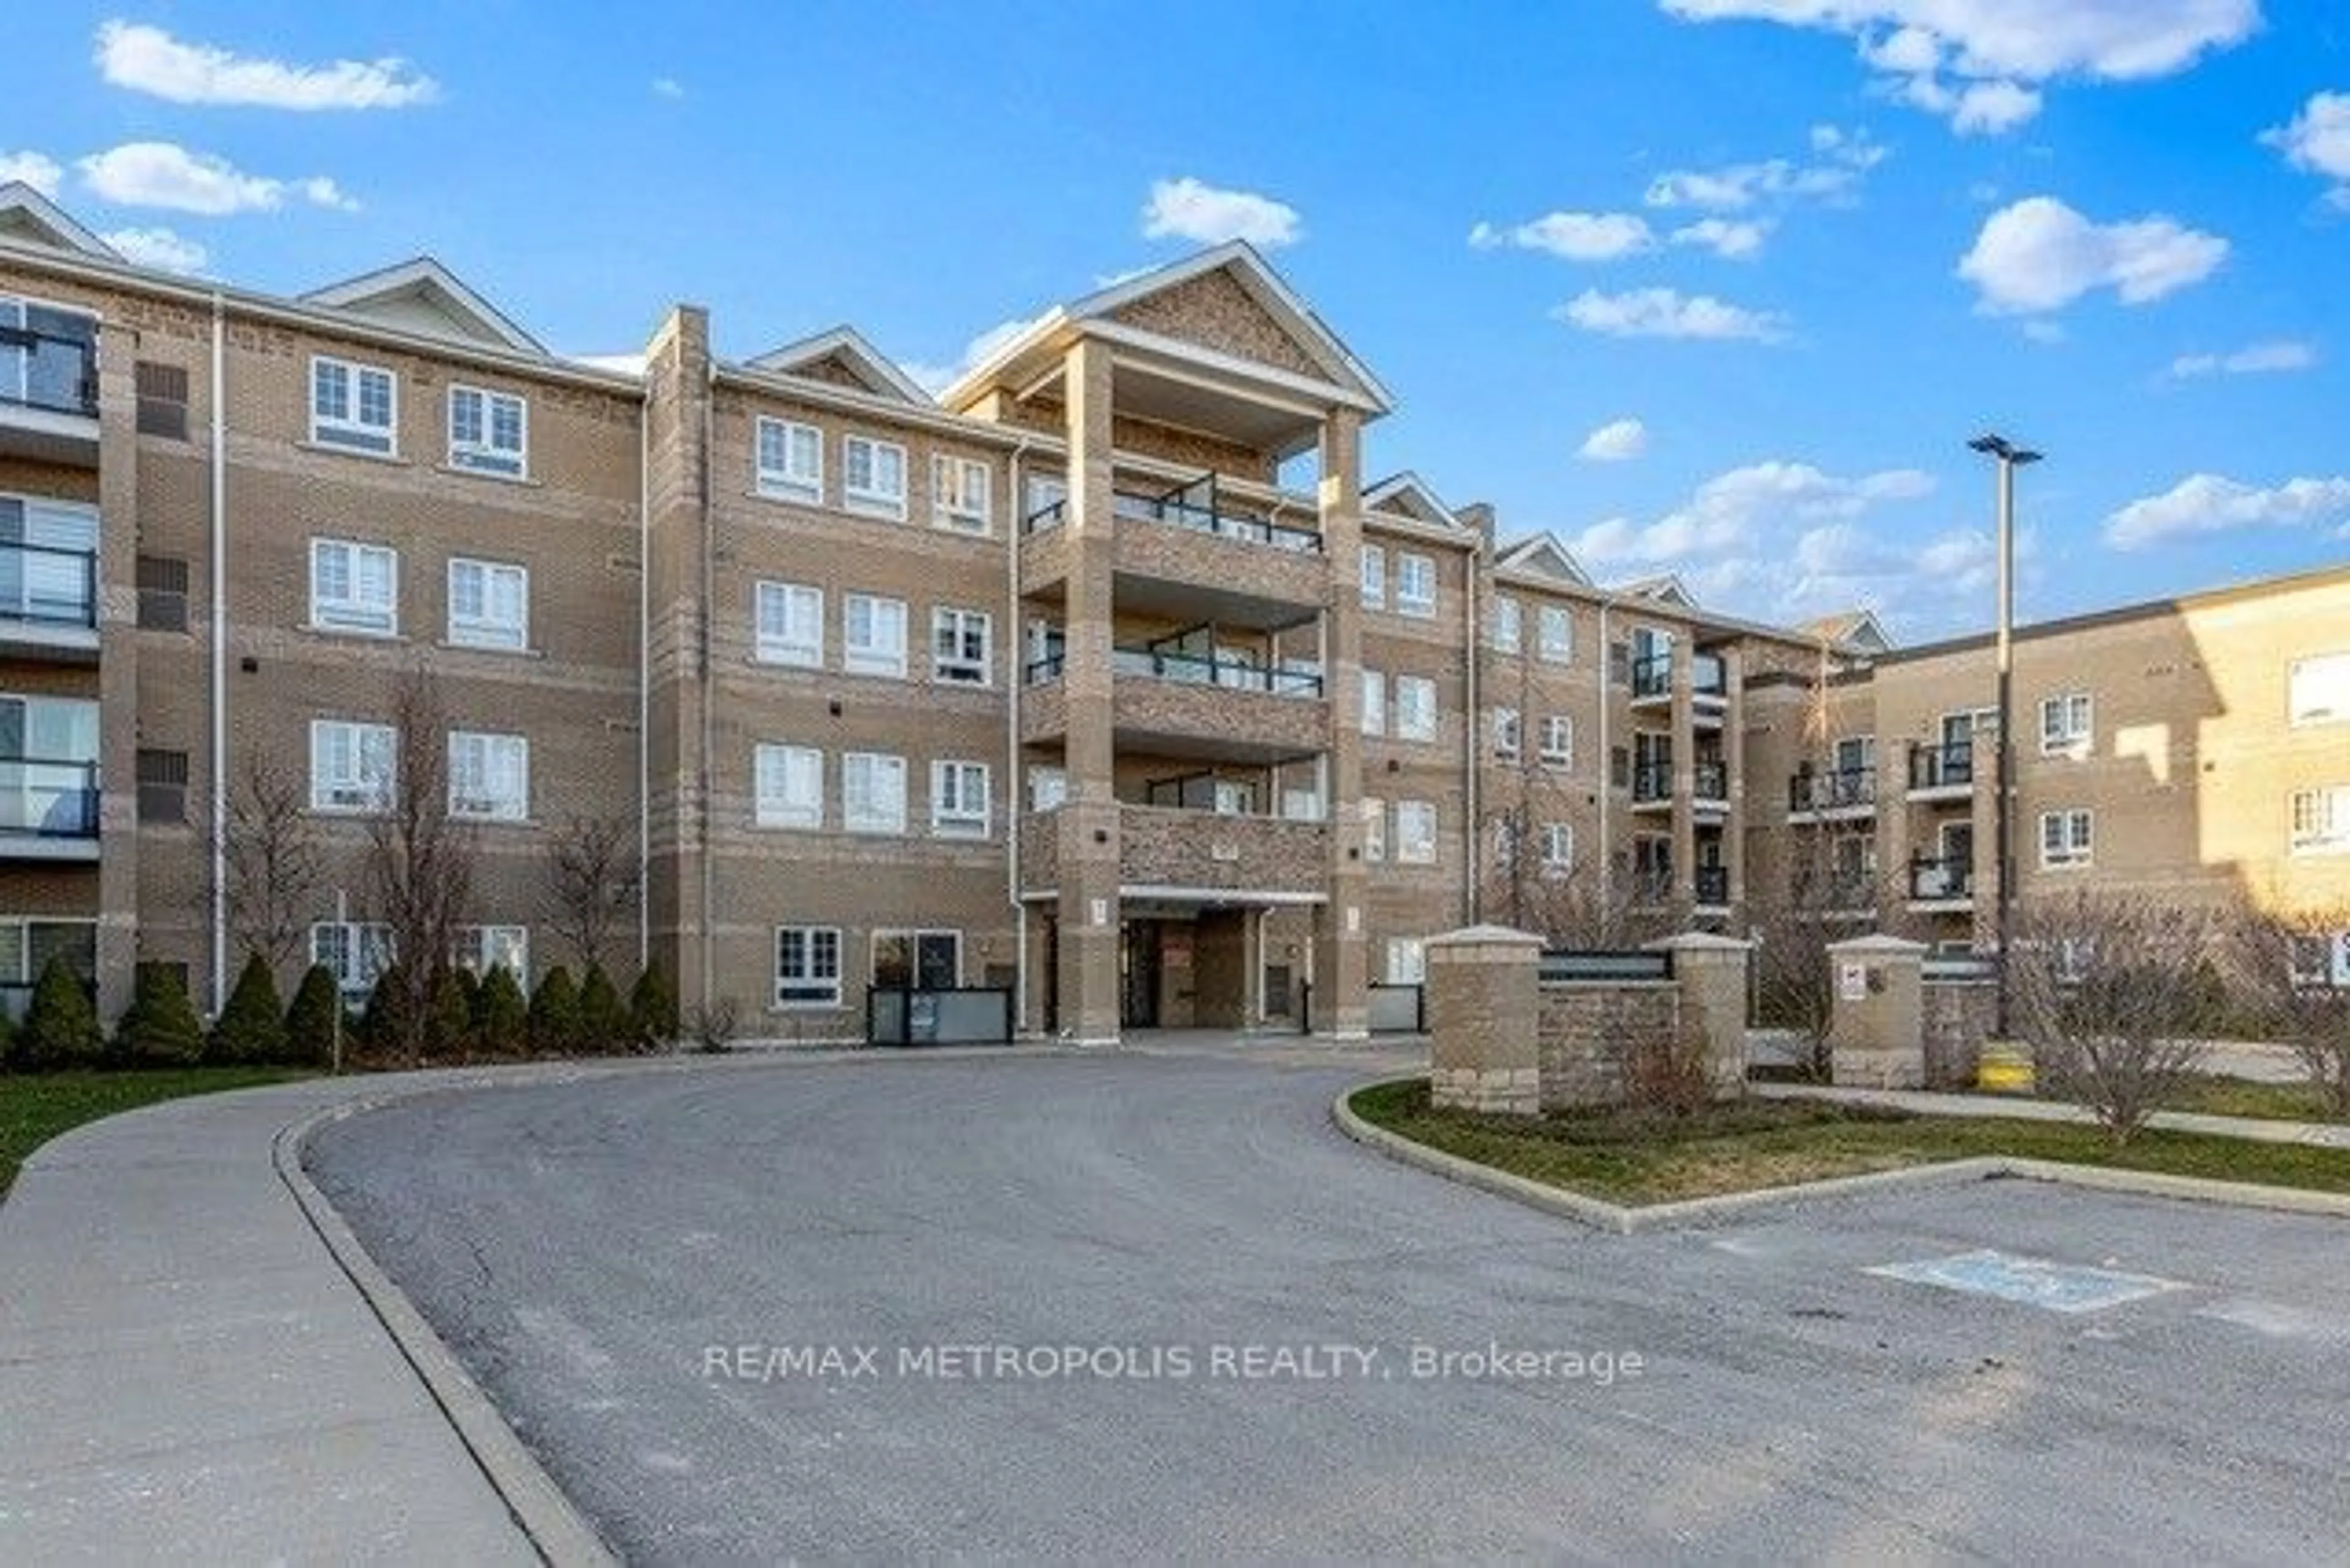 A pic from exterior of the house or condo for 481 Rupert Ave #2110, Whitchurch-Stouffville Ontario L4A 1Y7